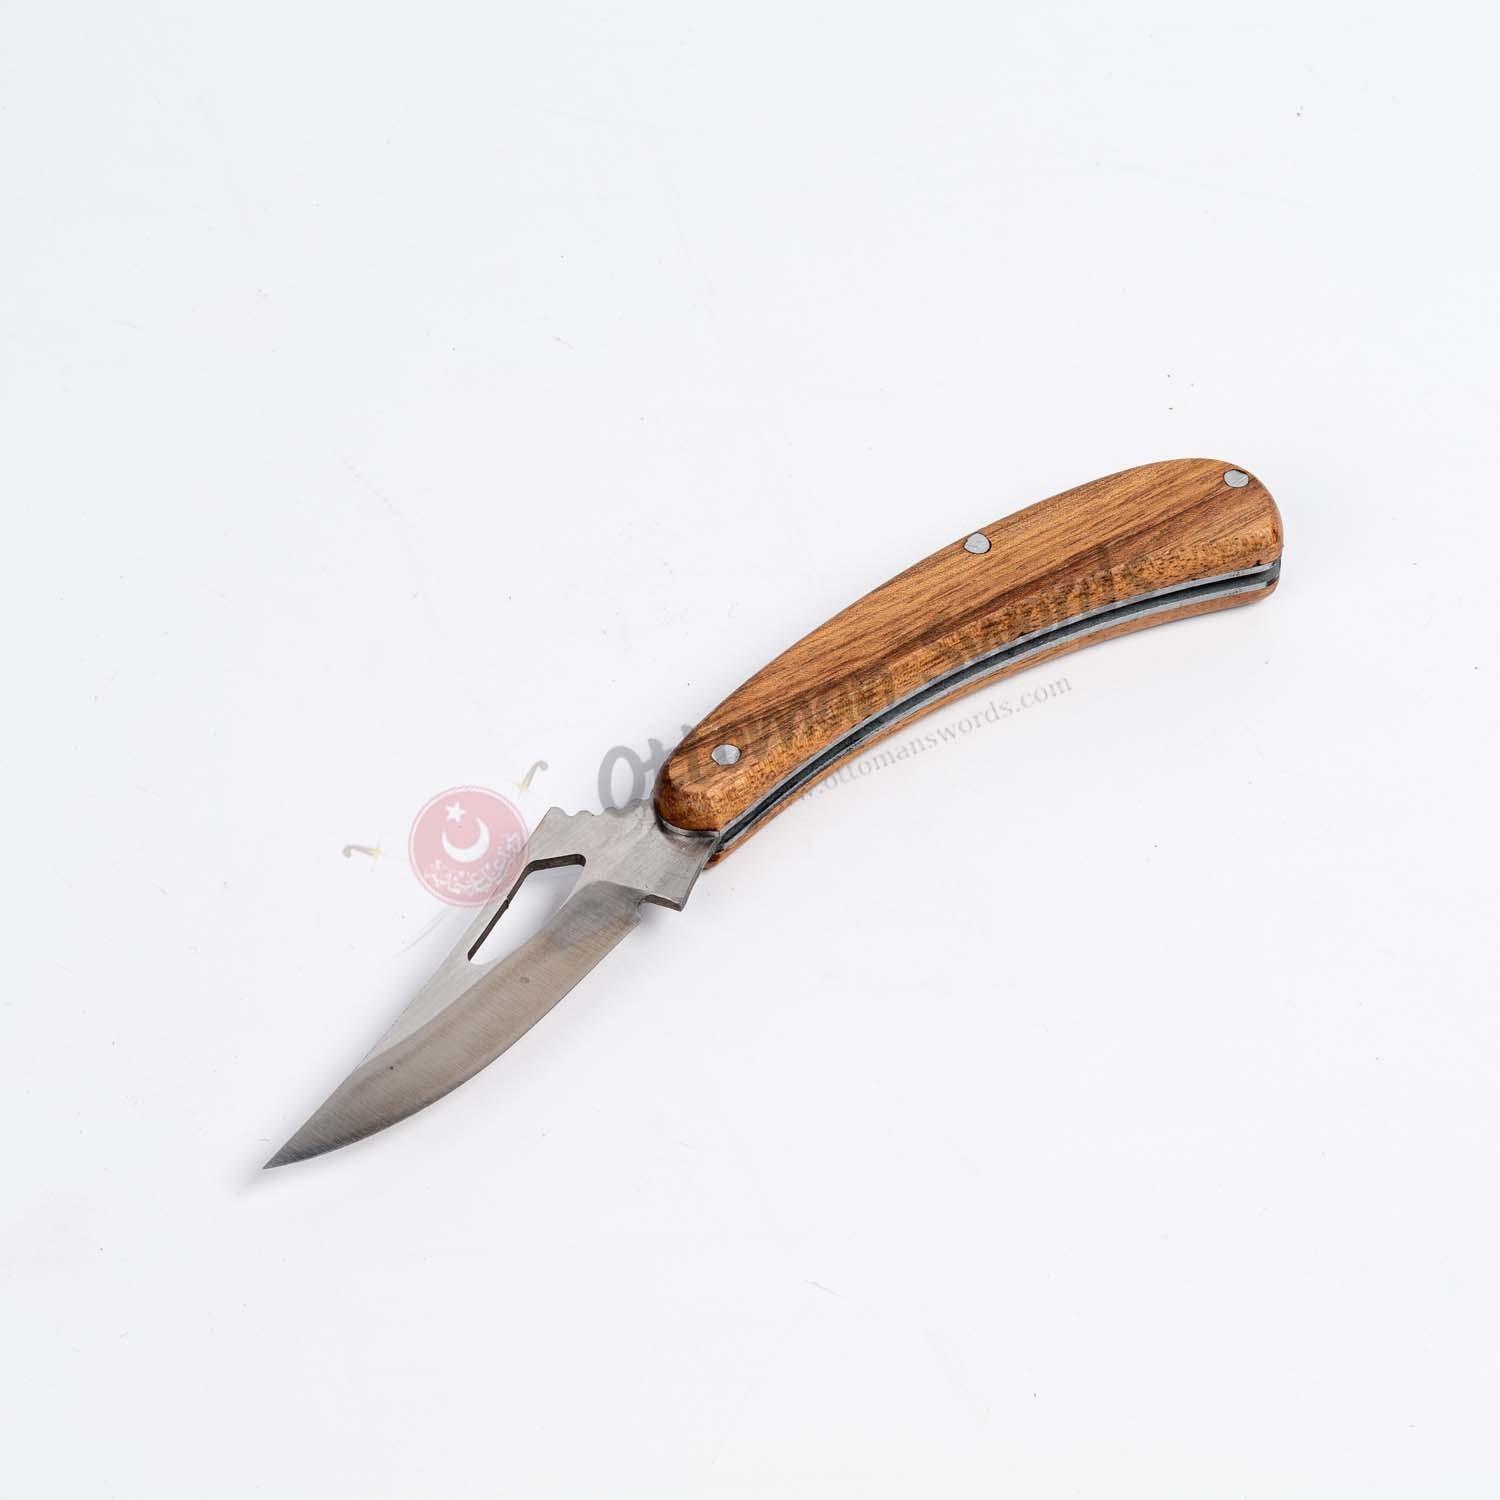 Walnut Handle Small Folding Knife 2.5 İnches Blade (1)